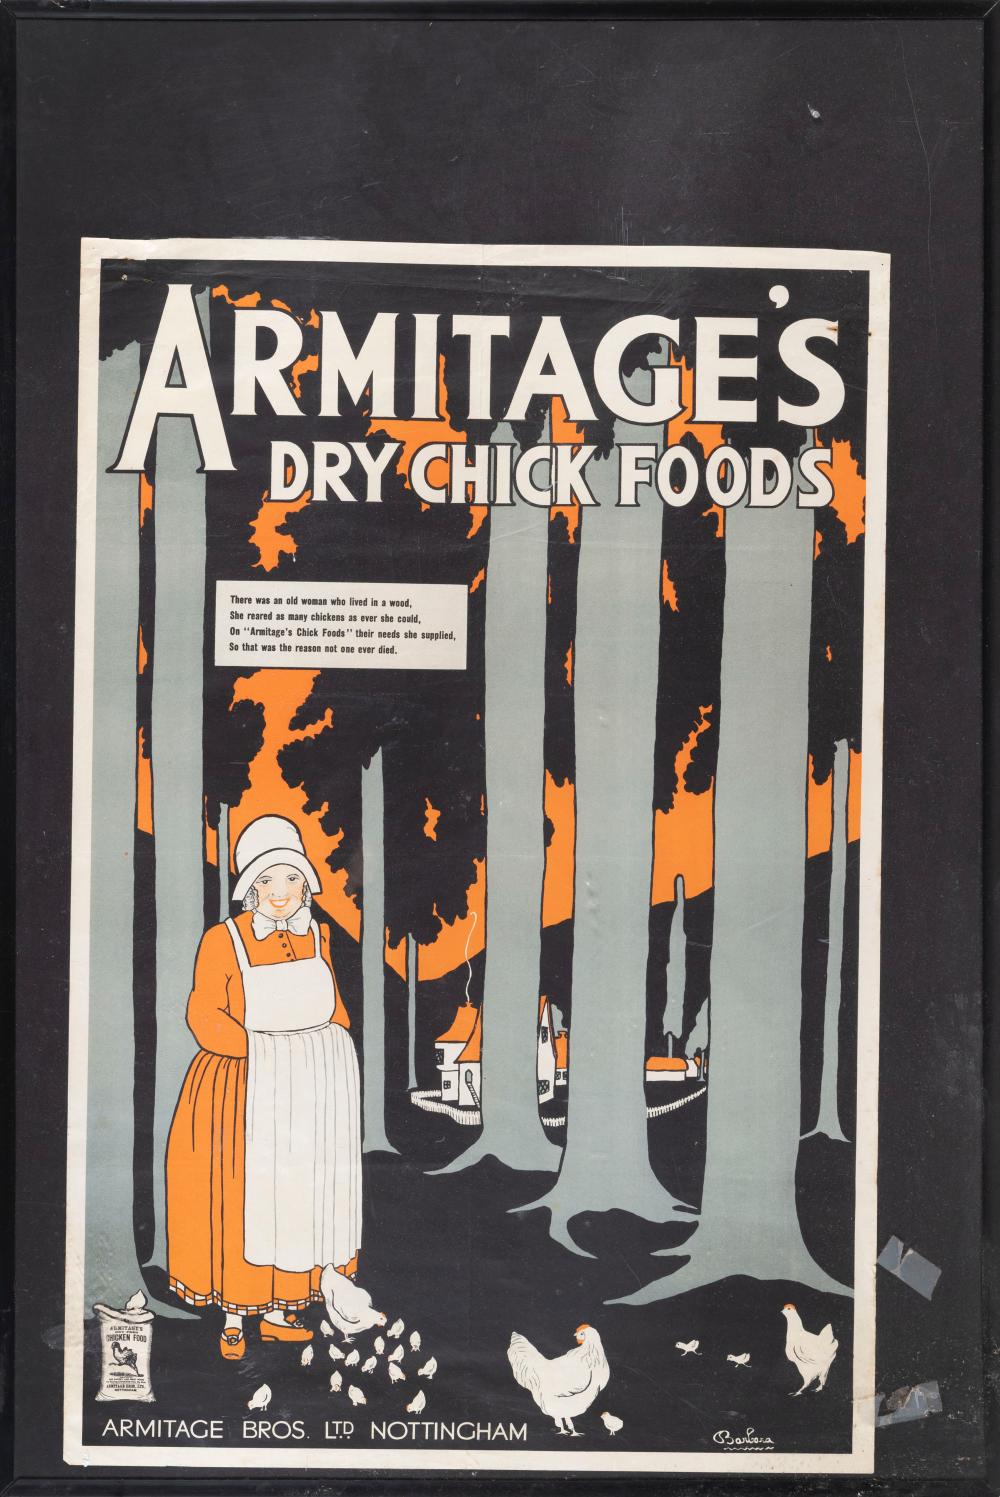 POSTER FOR ARMITAGES DRY CHICK 34e5a0